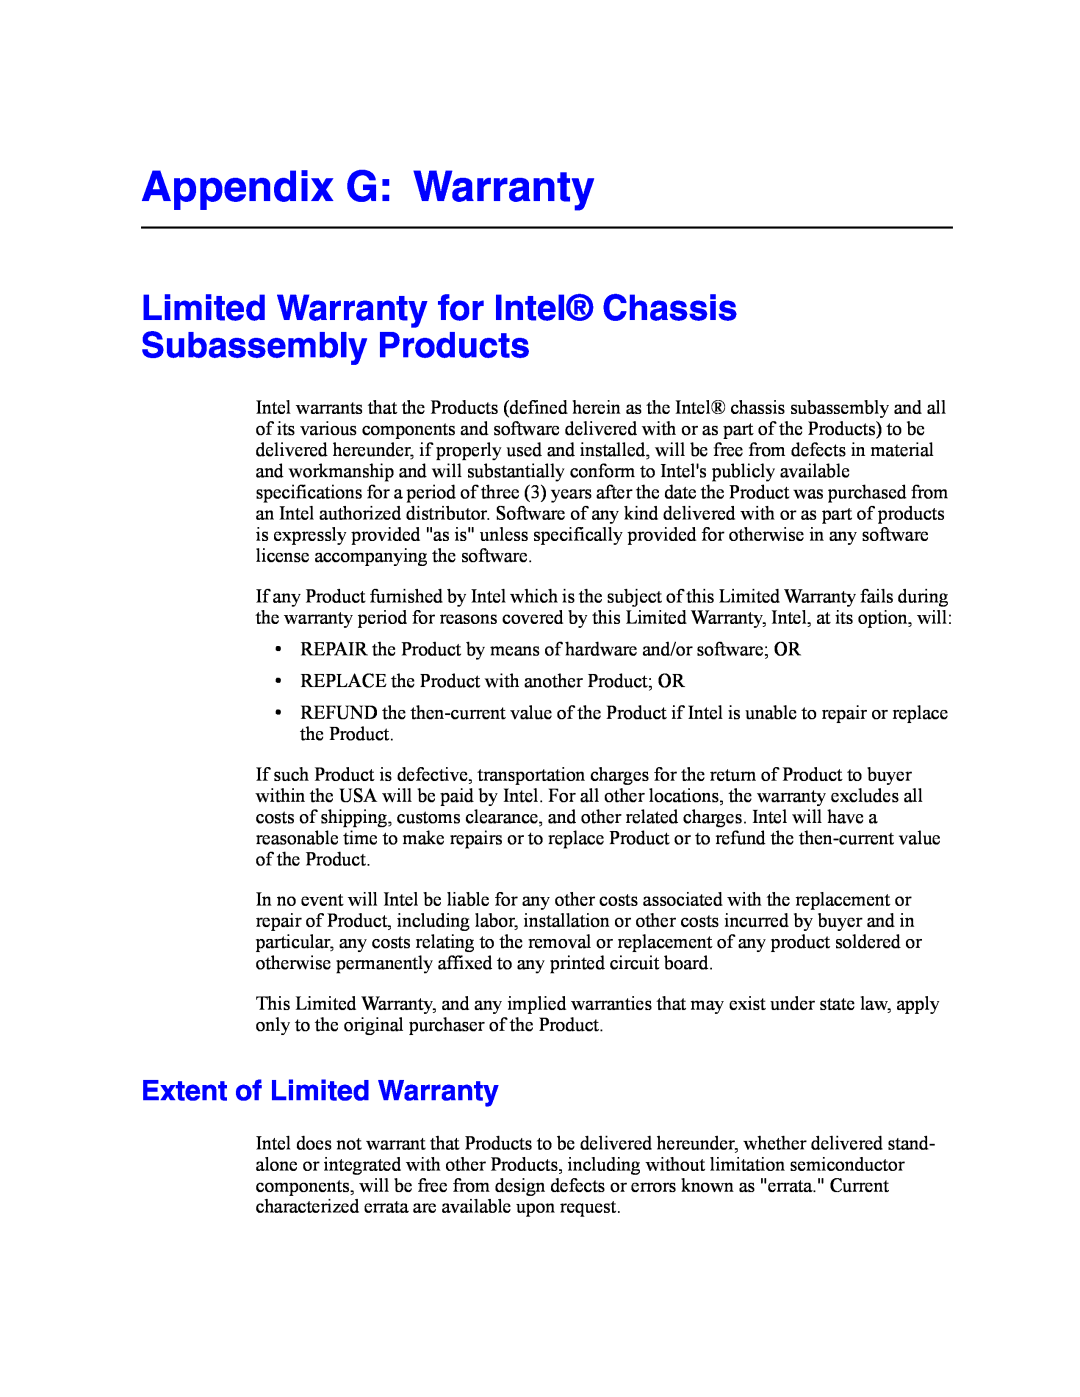 Intel SR2500AL Appendix G Warranty, Limited Warranty for Intel Chassis Subassembly Products, Extent of Limited Warranty 